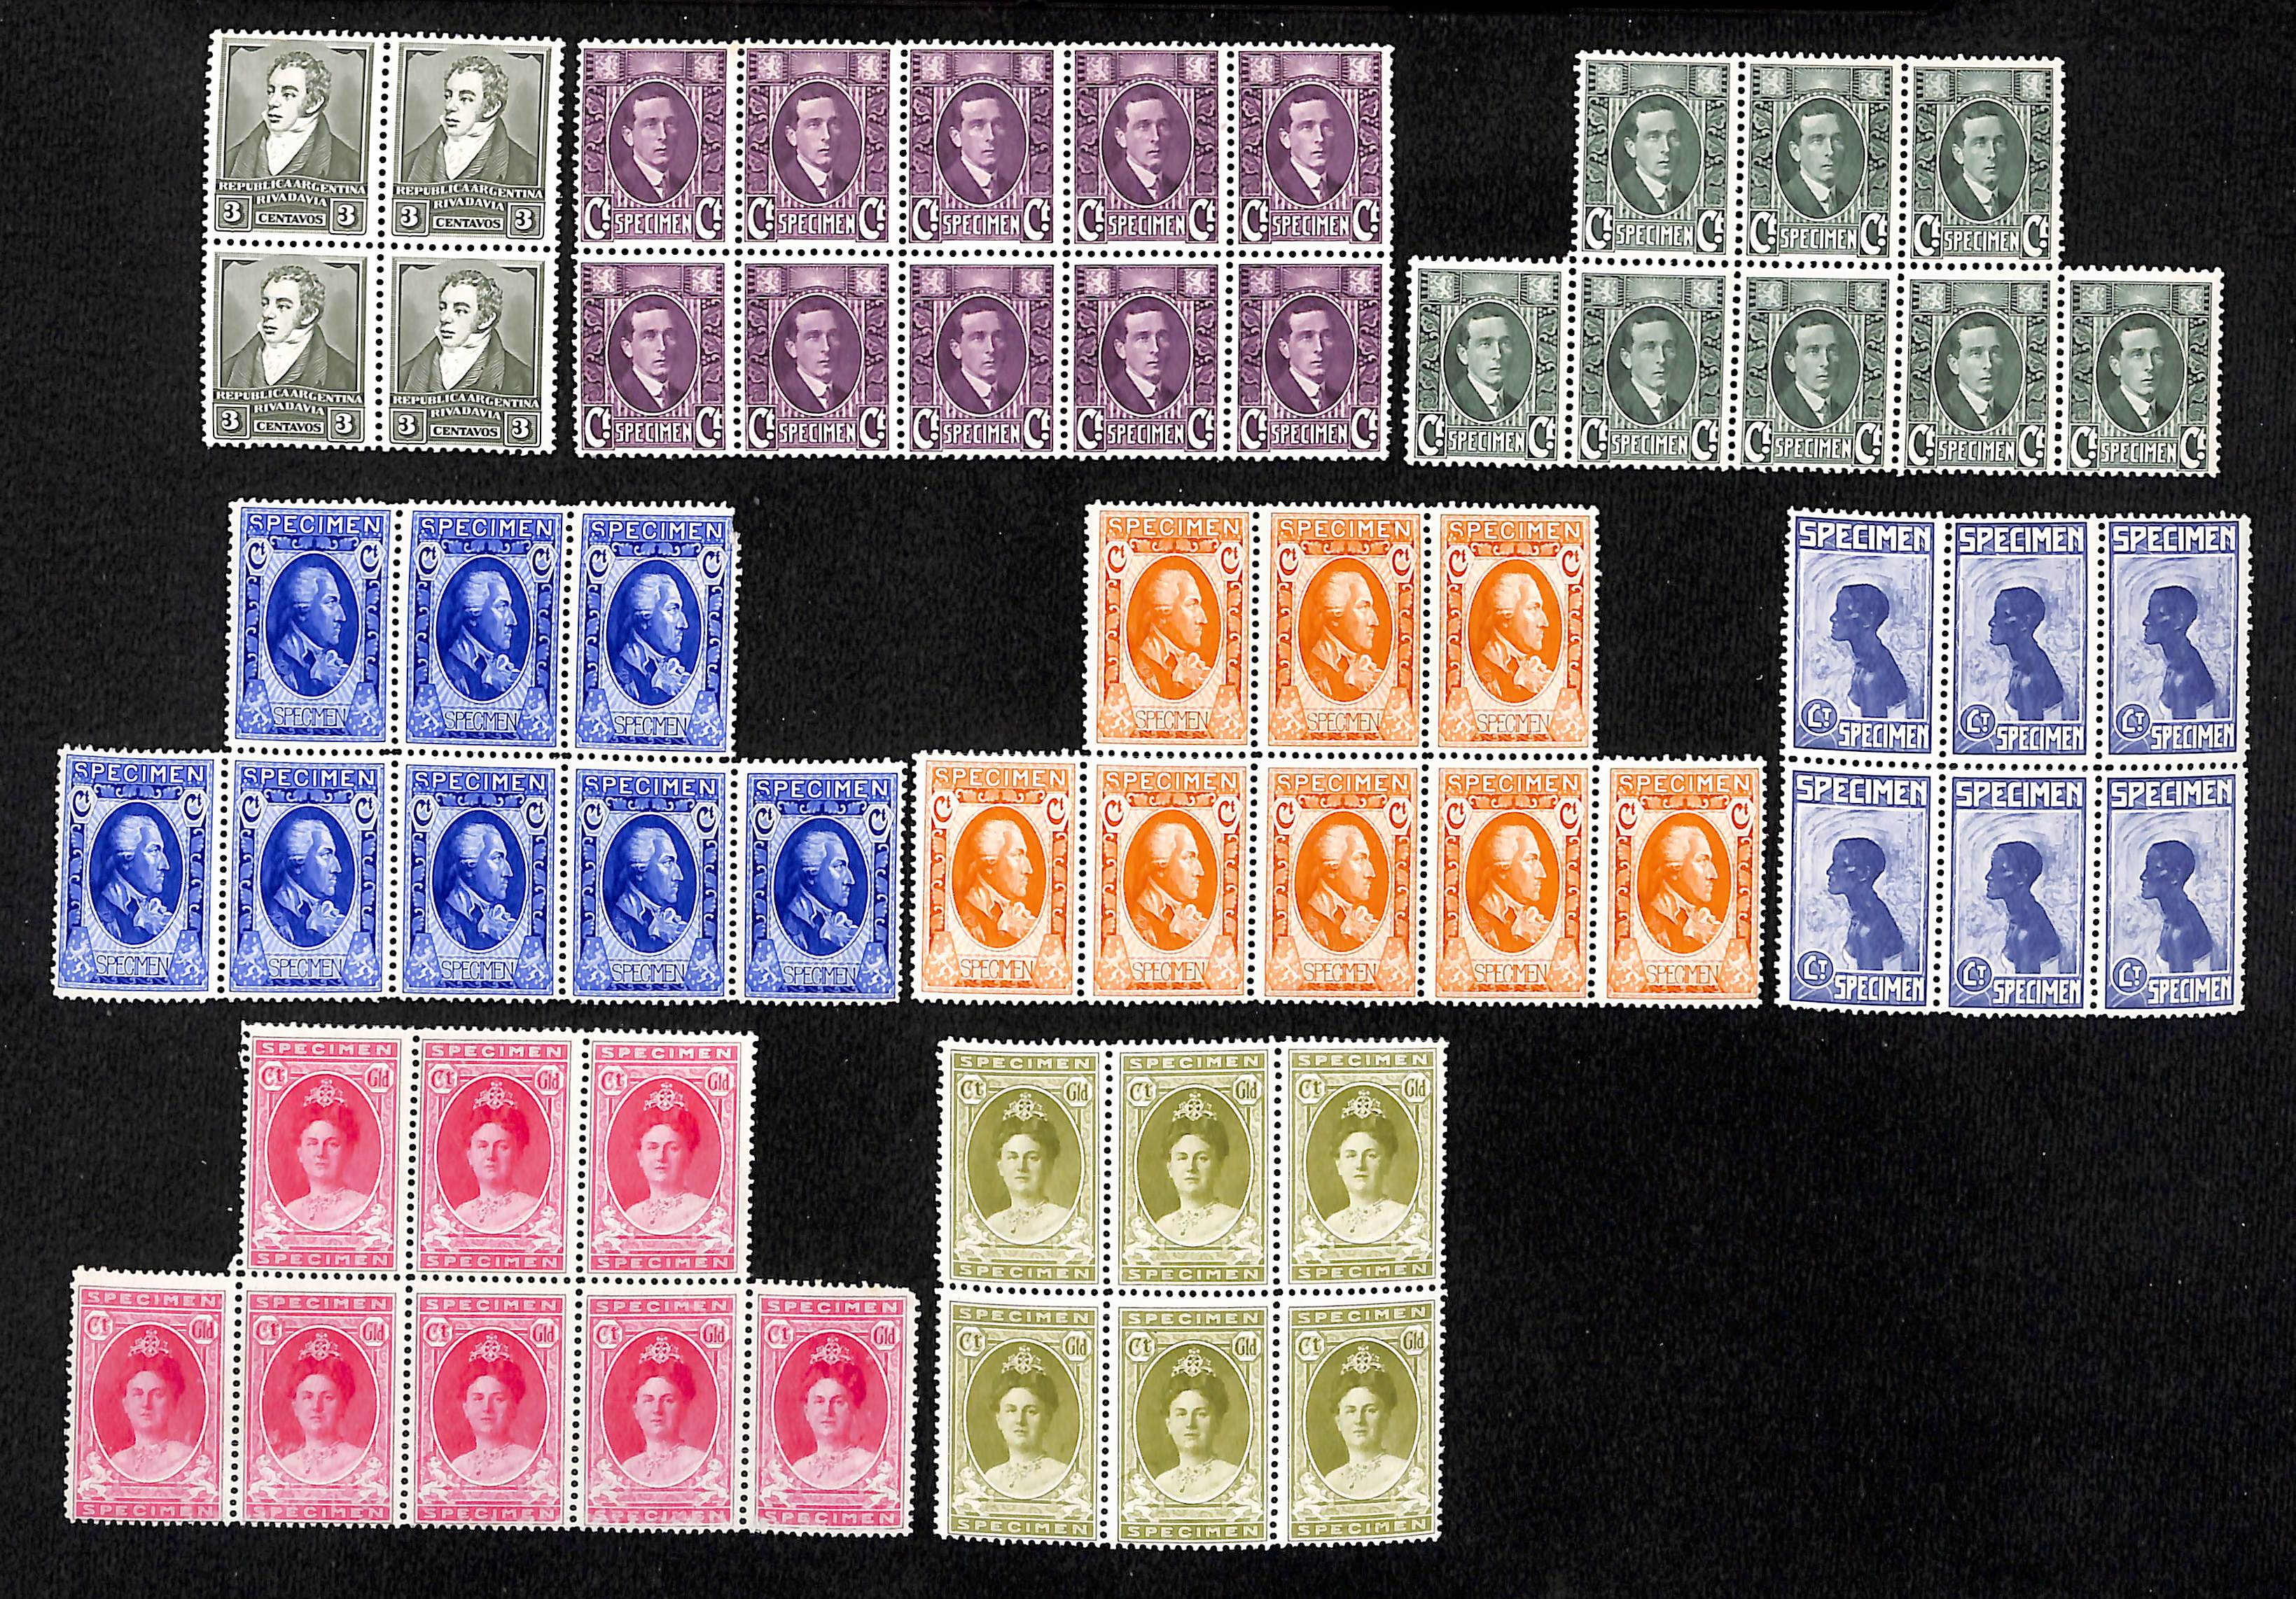 c.1923 Harrison & Sons sample stamps inscribed "SPECIMEN", all perforated, some watermarked, designs